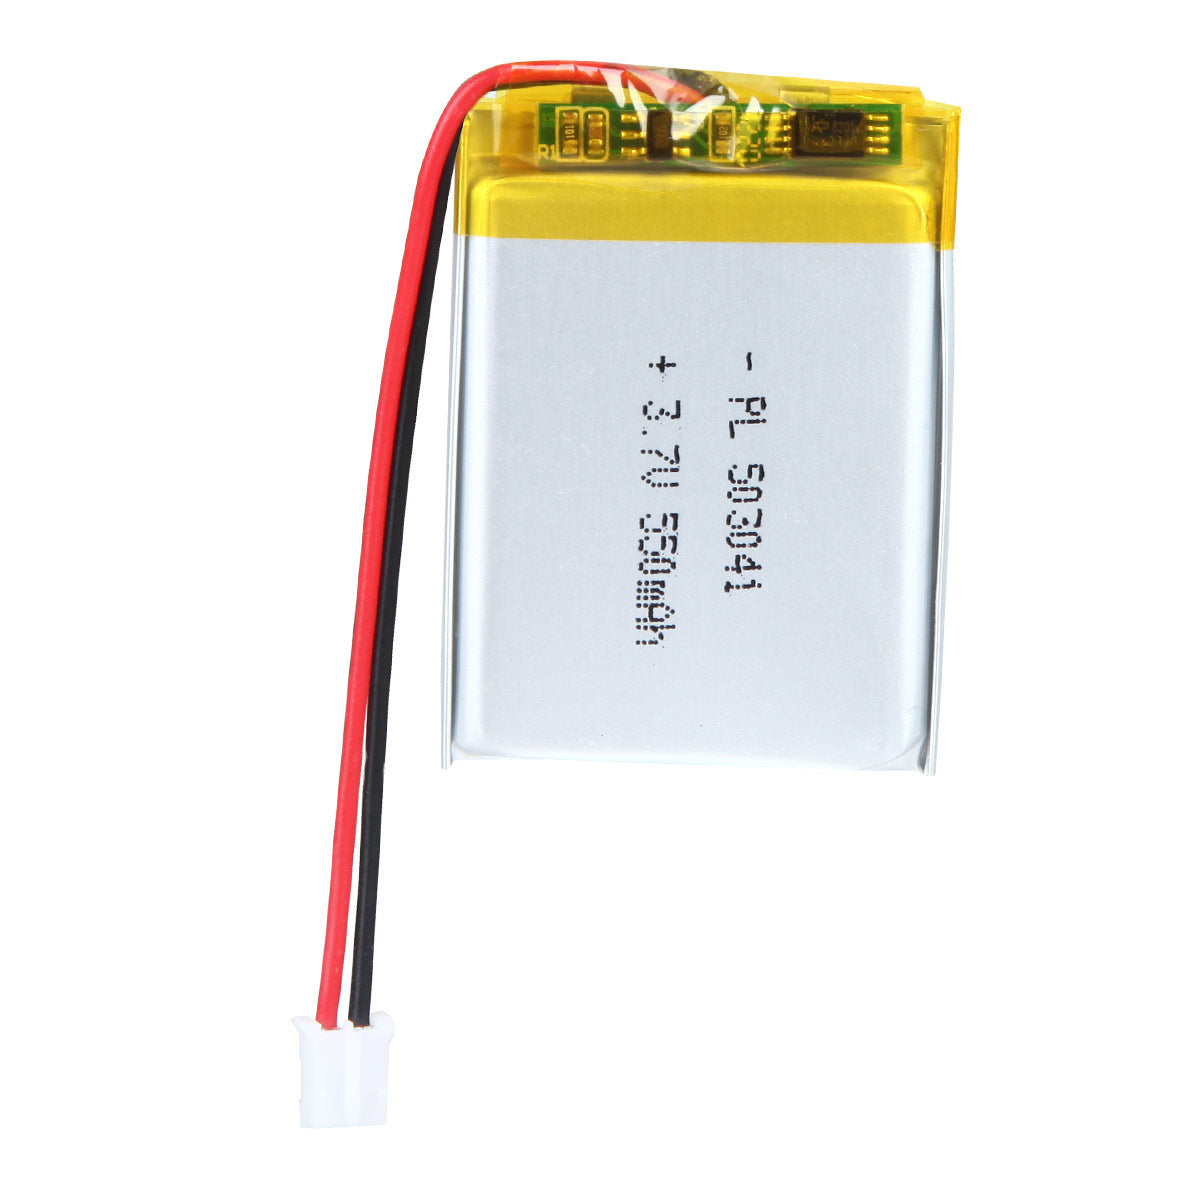 YDL 3.7V 550mAh 503041 Rechargeable Lithium Polymer Battery Length 43mm